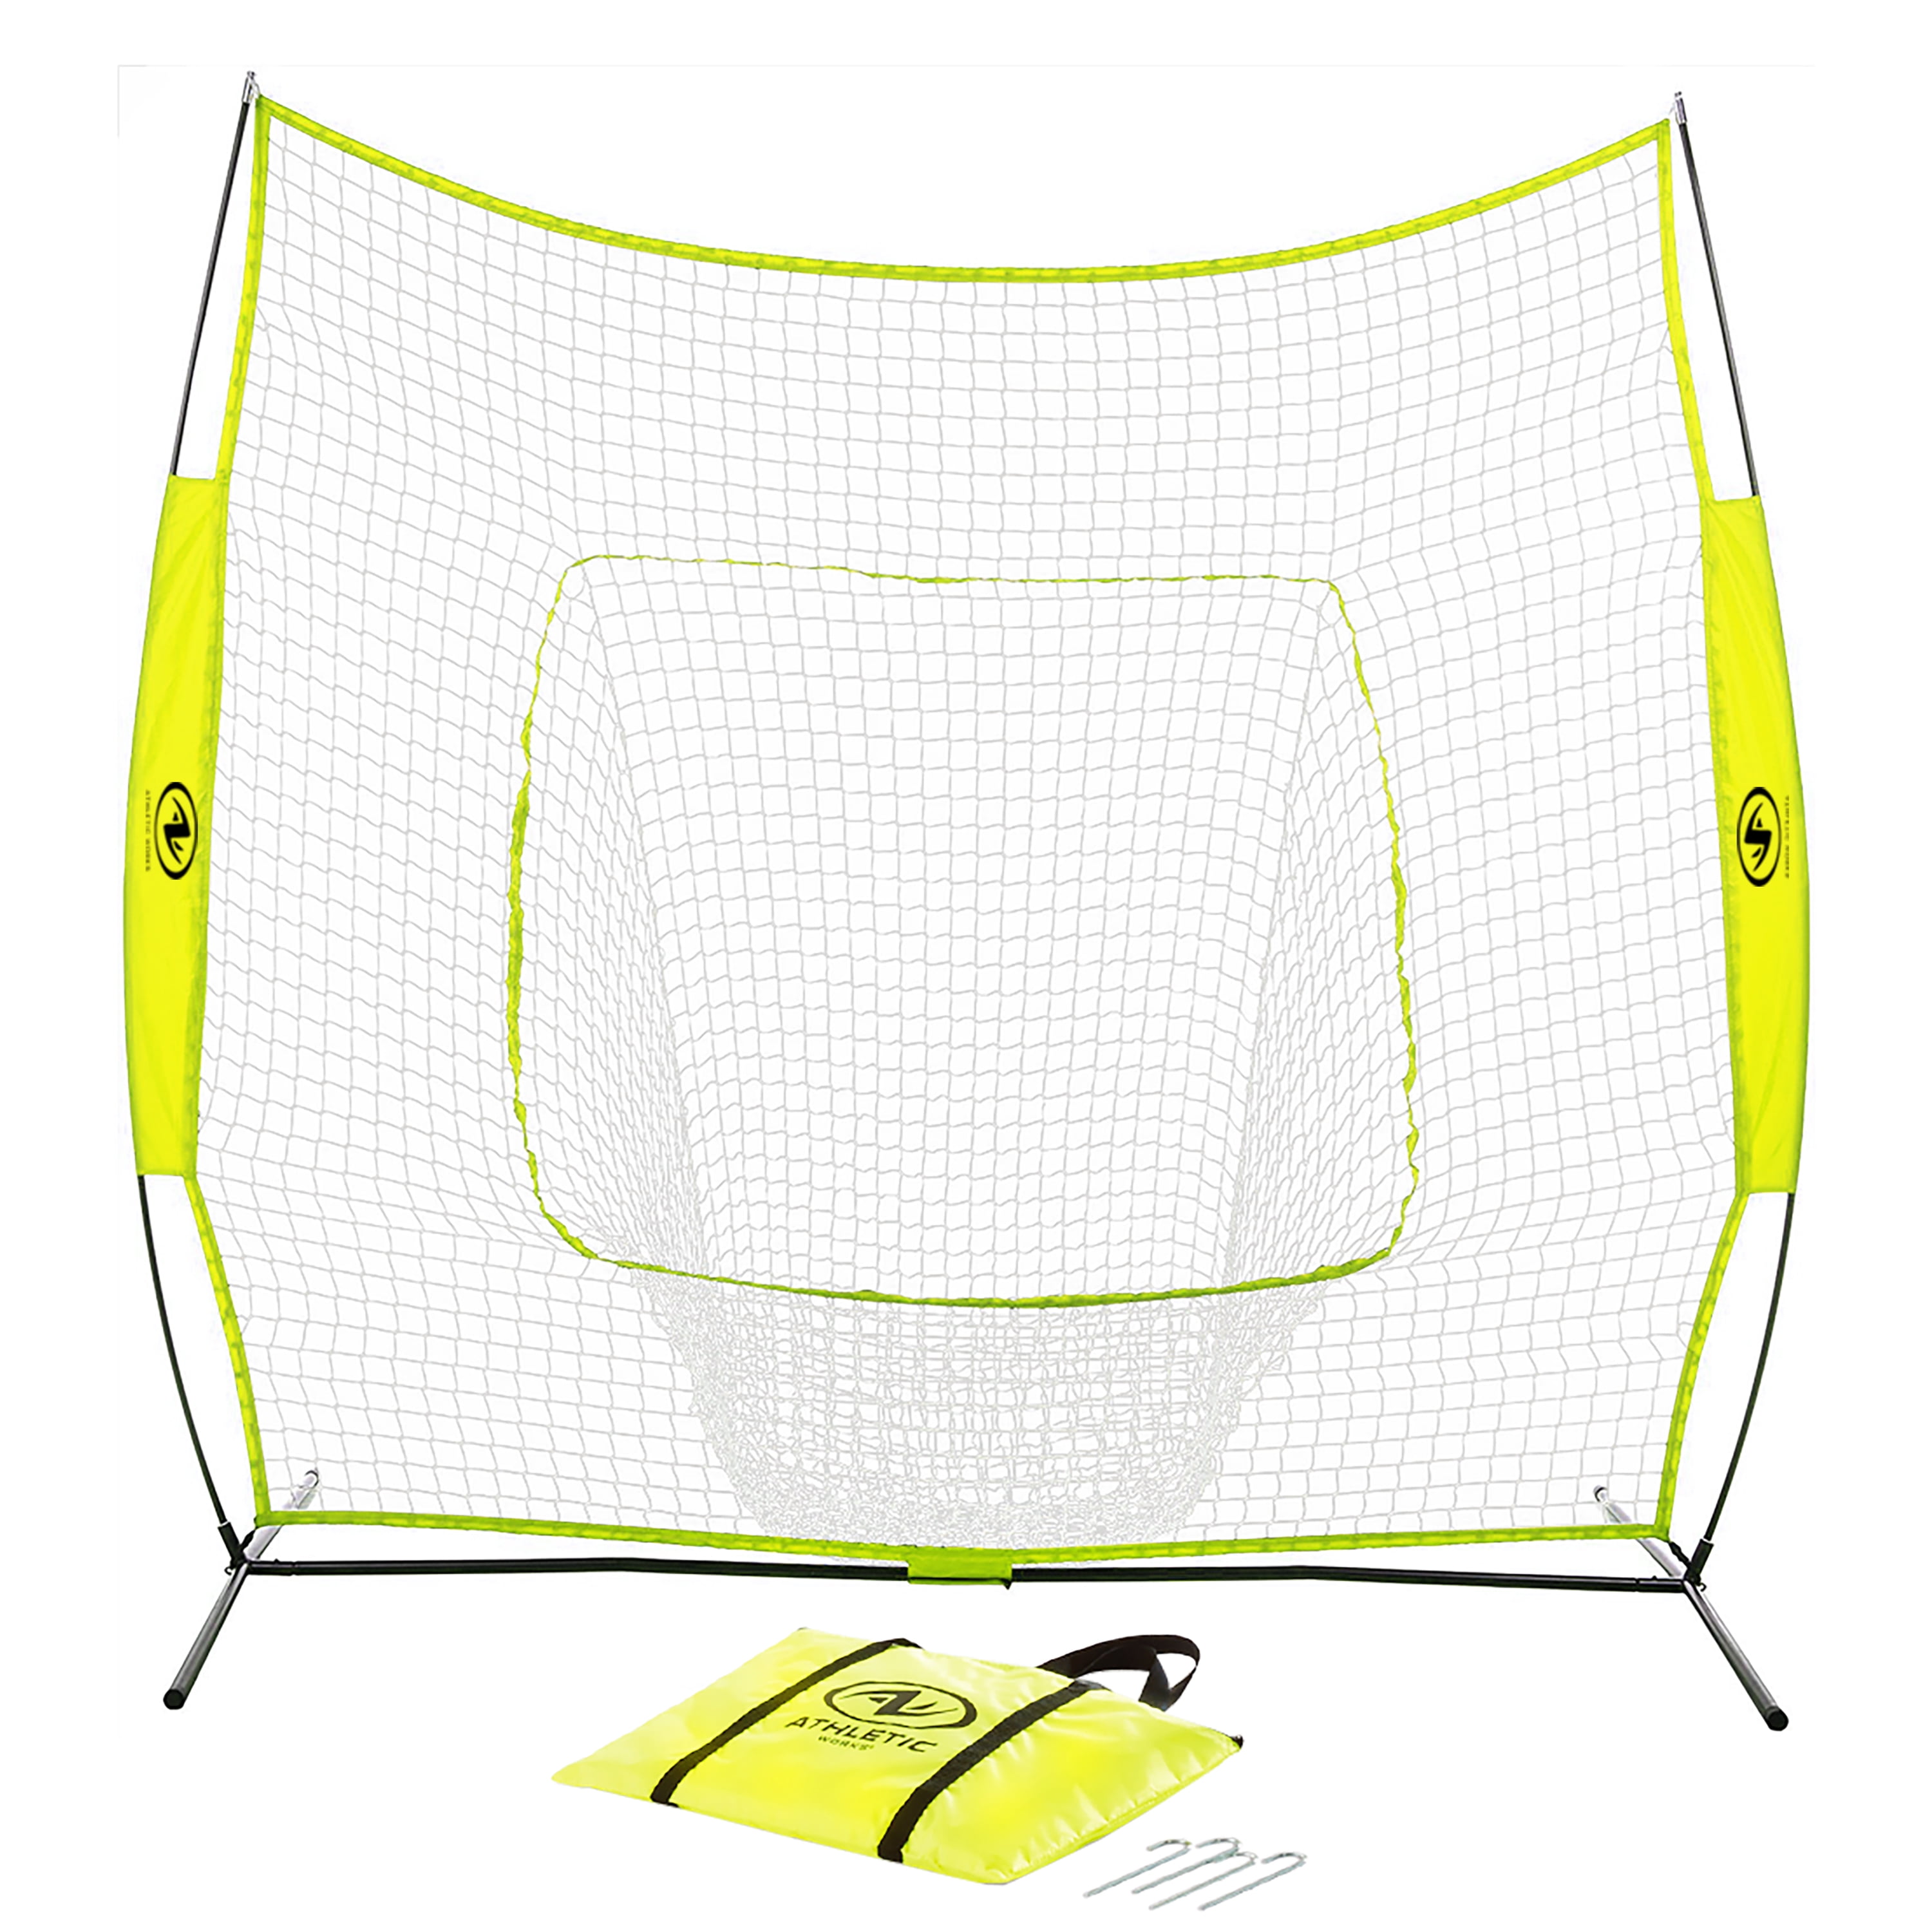 Athletic Works 7 Ft. x7 Ft. Hit Pitch Training Net for Baseball and Softball, Baseball Protective Screens